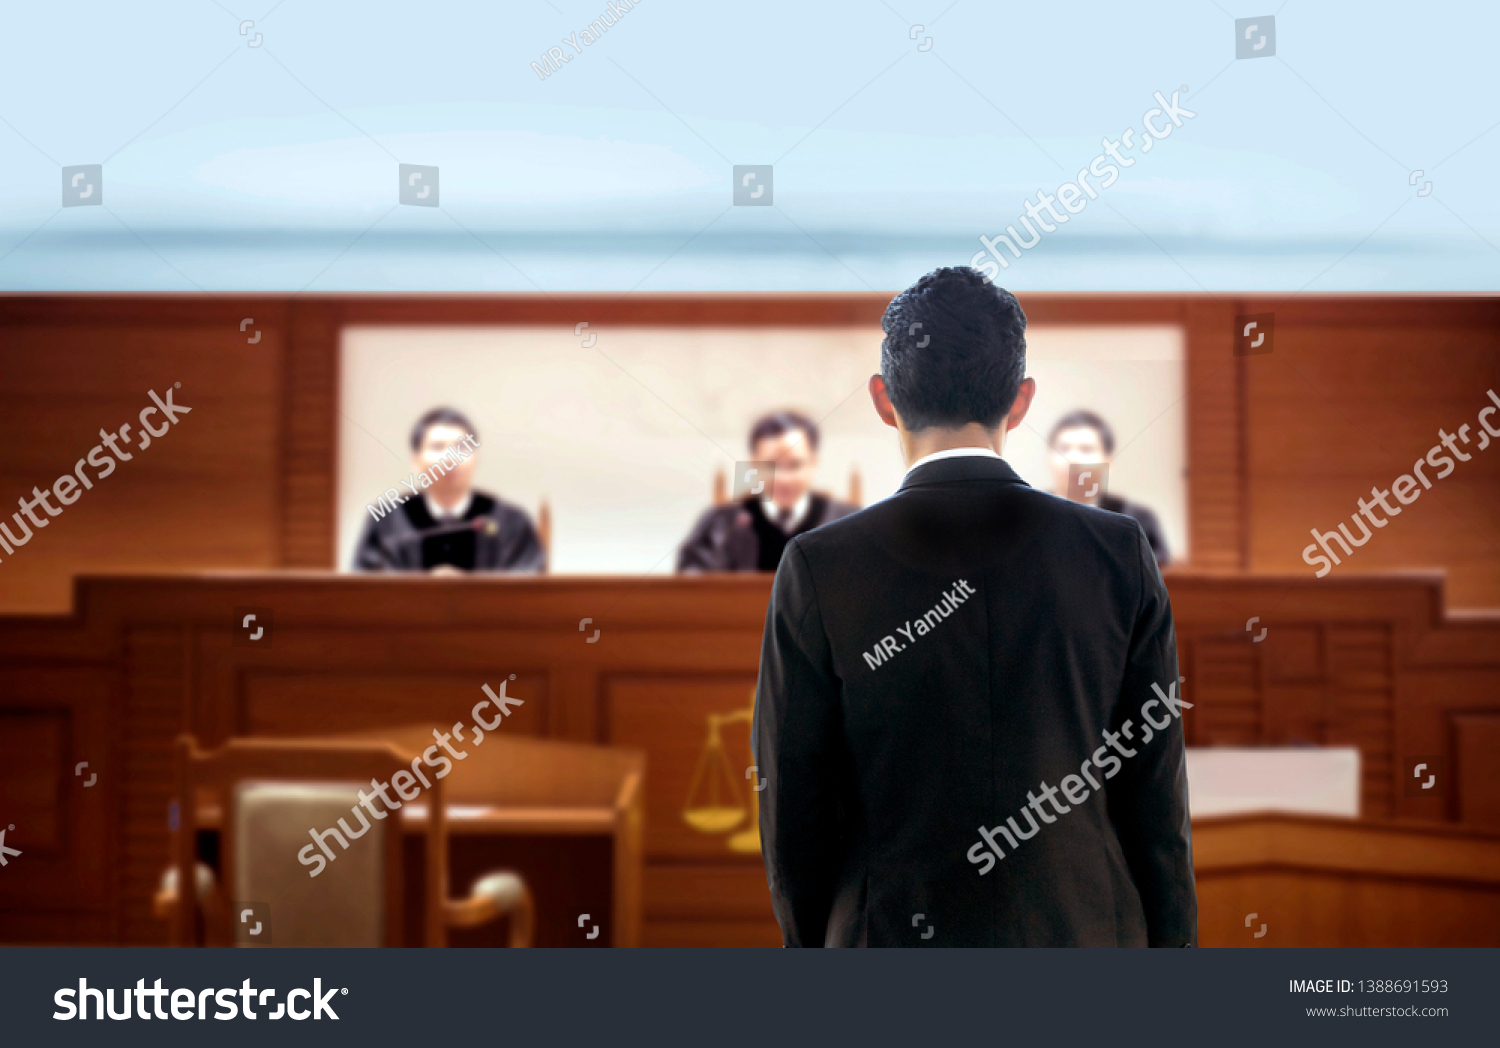 back of lawyer talking to attorney in courtroom . The legal adjustment trail justice concept. Lawyer is famous occupation of high performance in political judgment in human relation rule in seriously. #1388691593